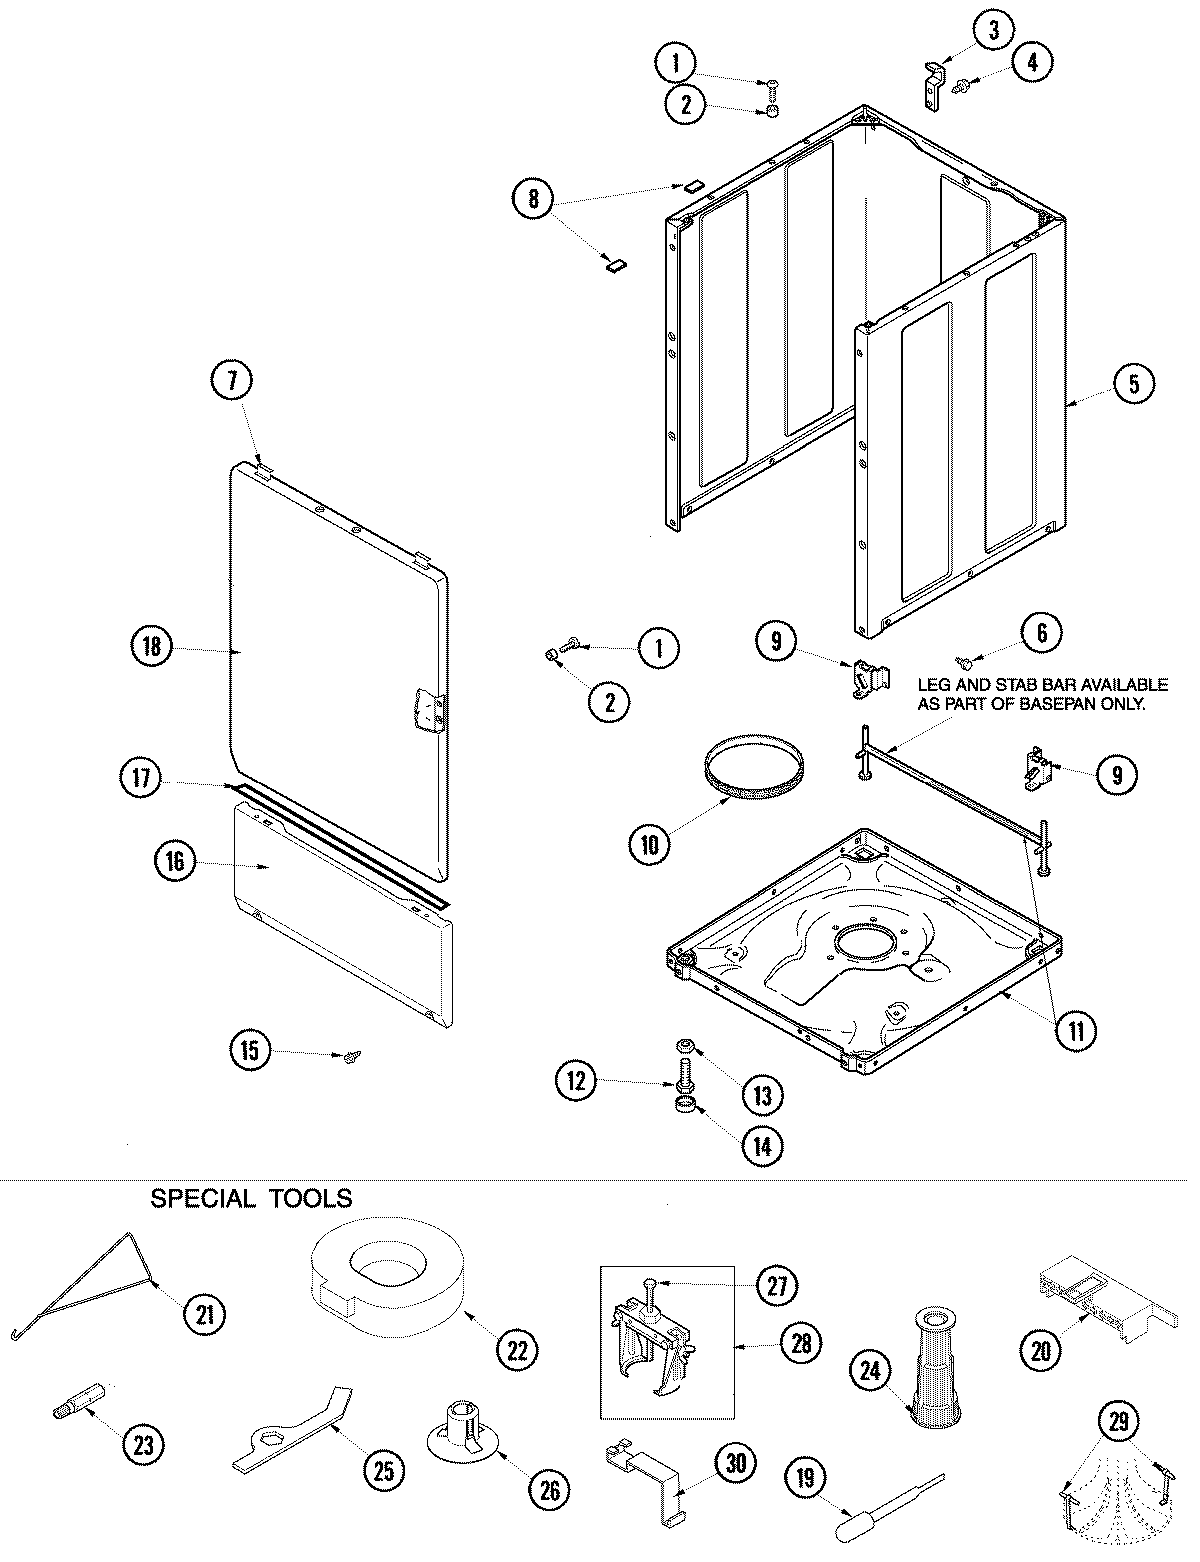 01 - CABINET, BASE & SPECIAL TOOLS